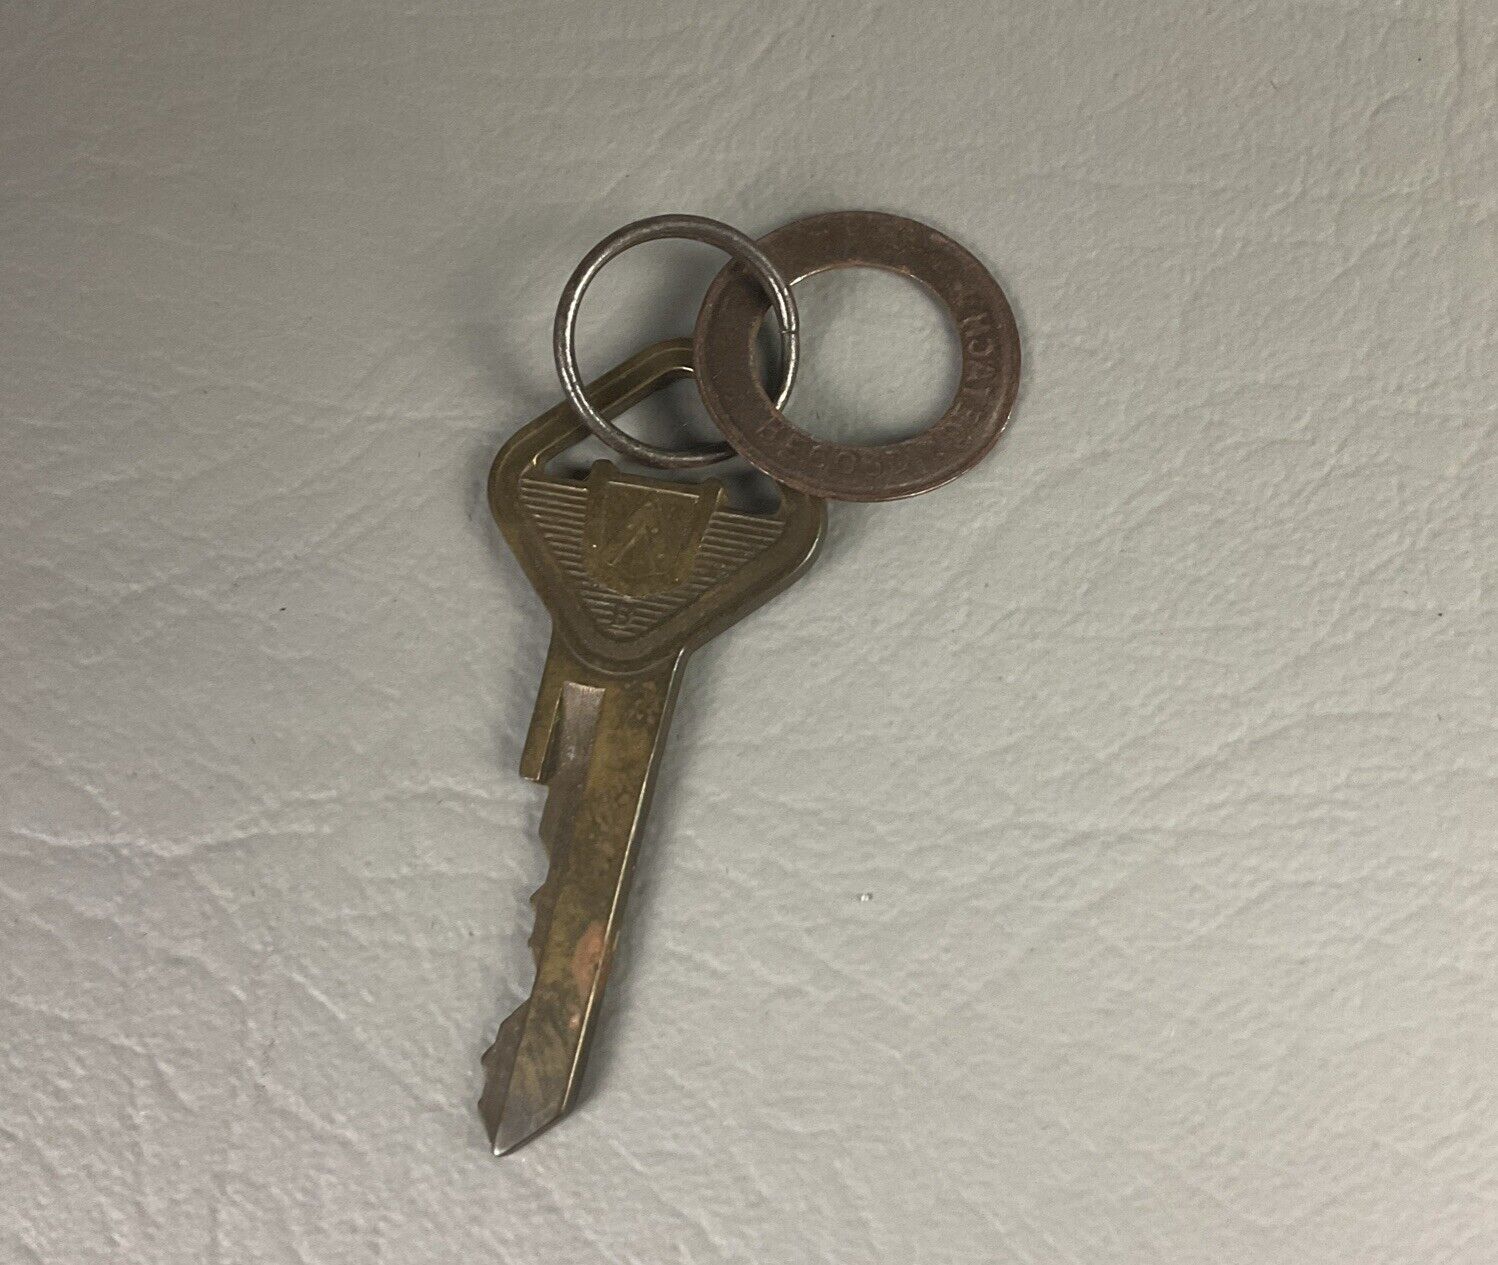 ANTIQUE FORD KEY 1930’S-1940’S B